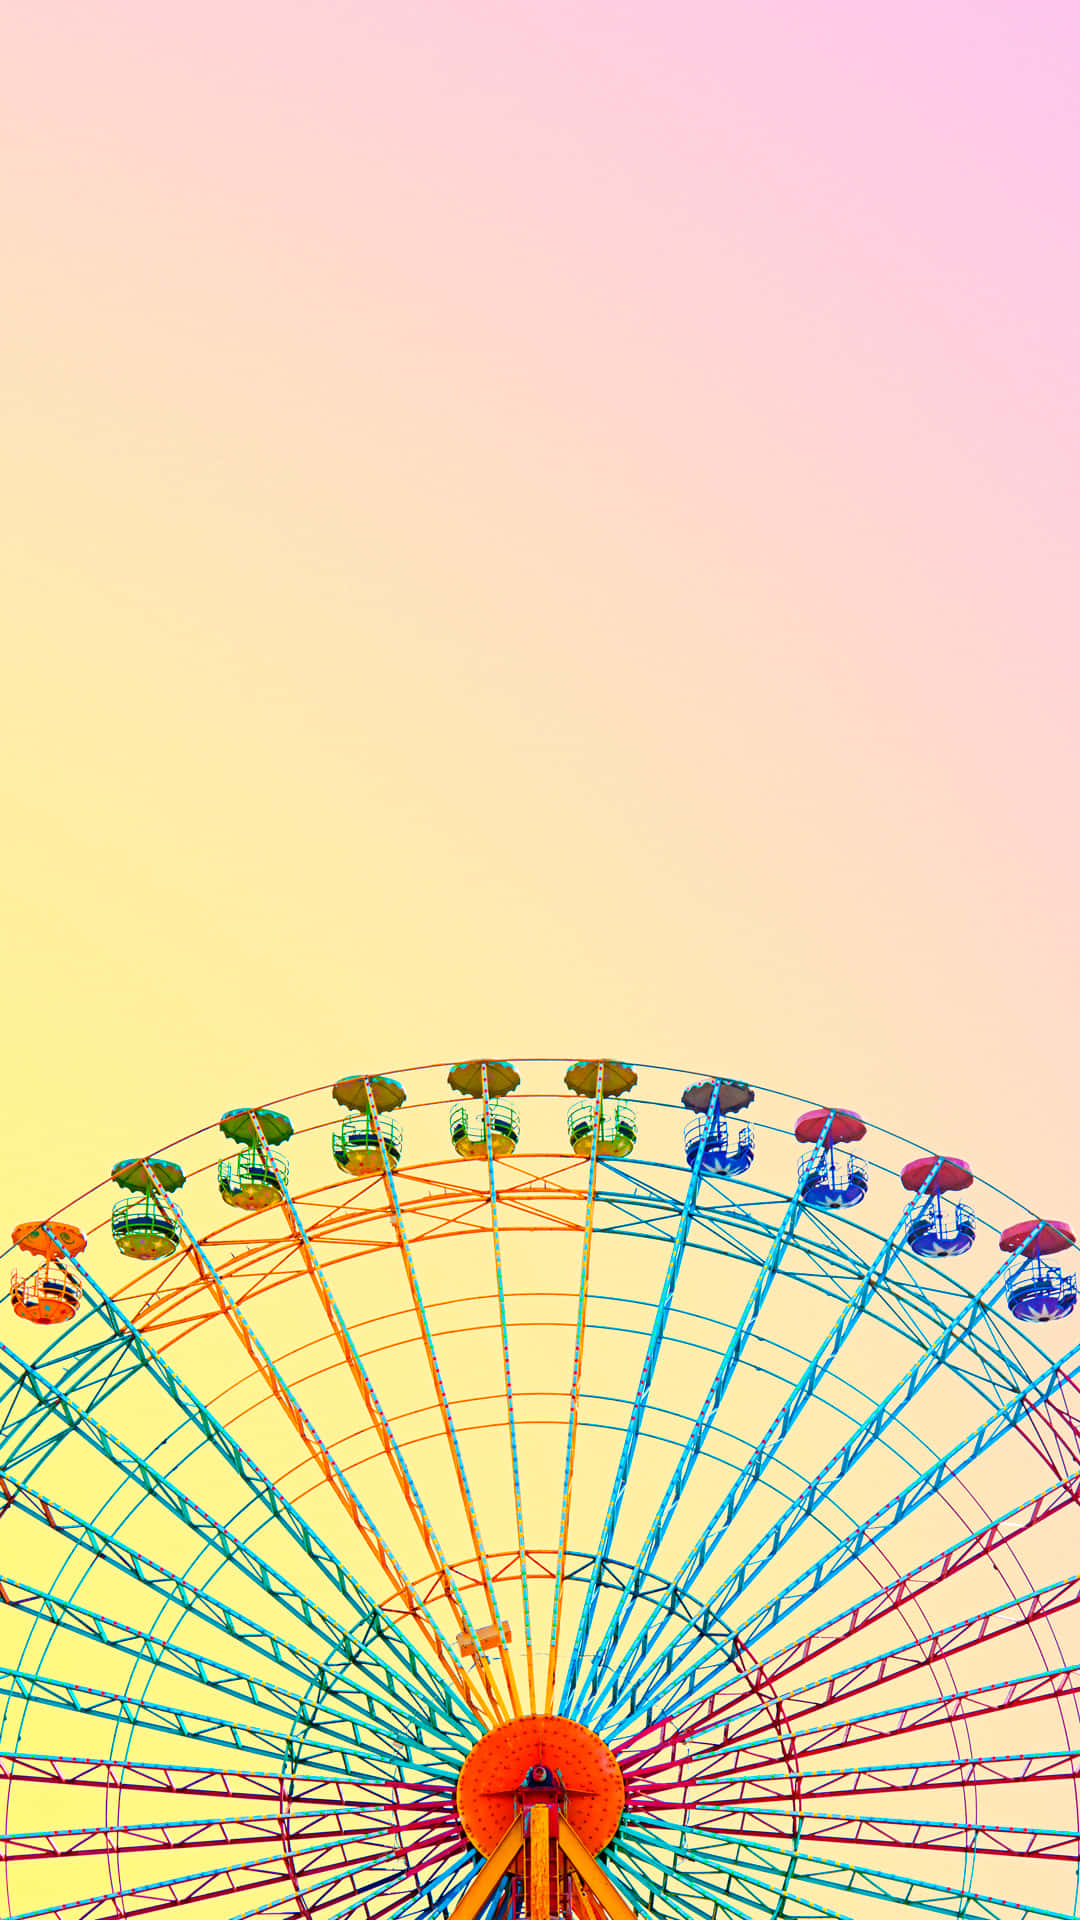 Colorful Iphone Pastel-colored Ferris Wheel Background